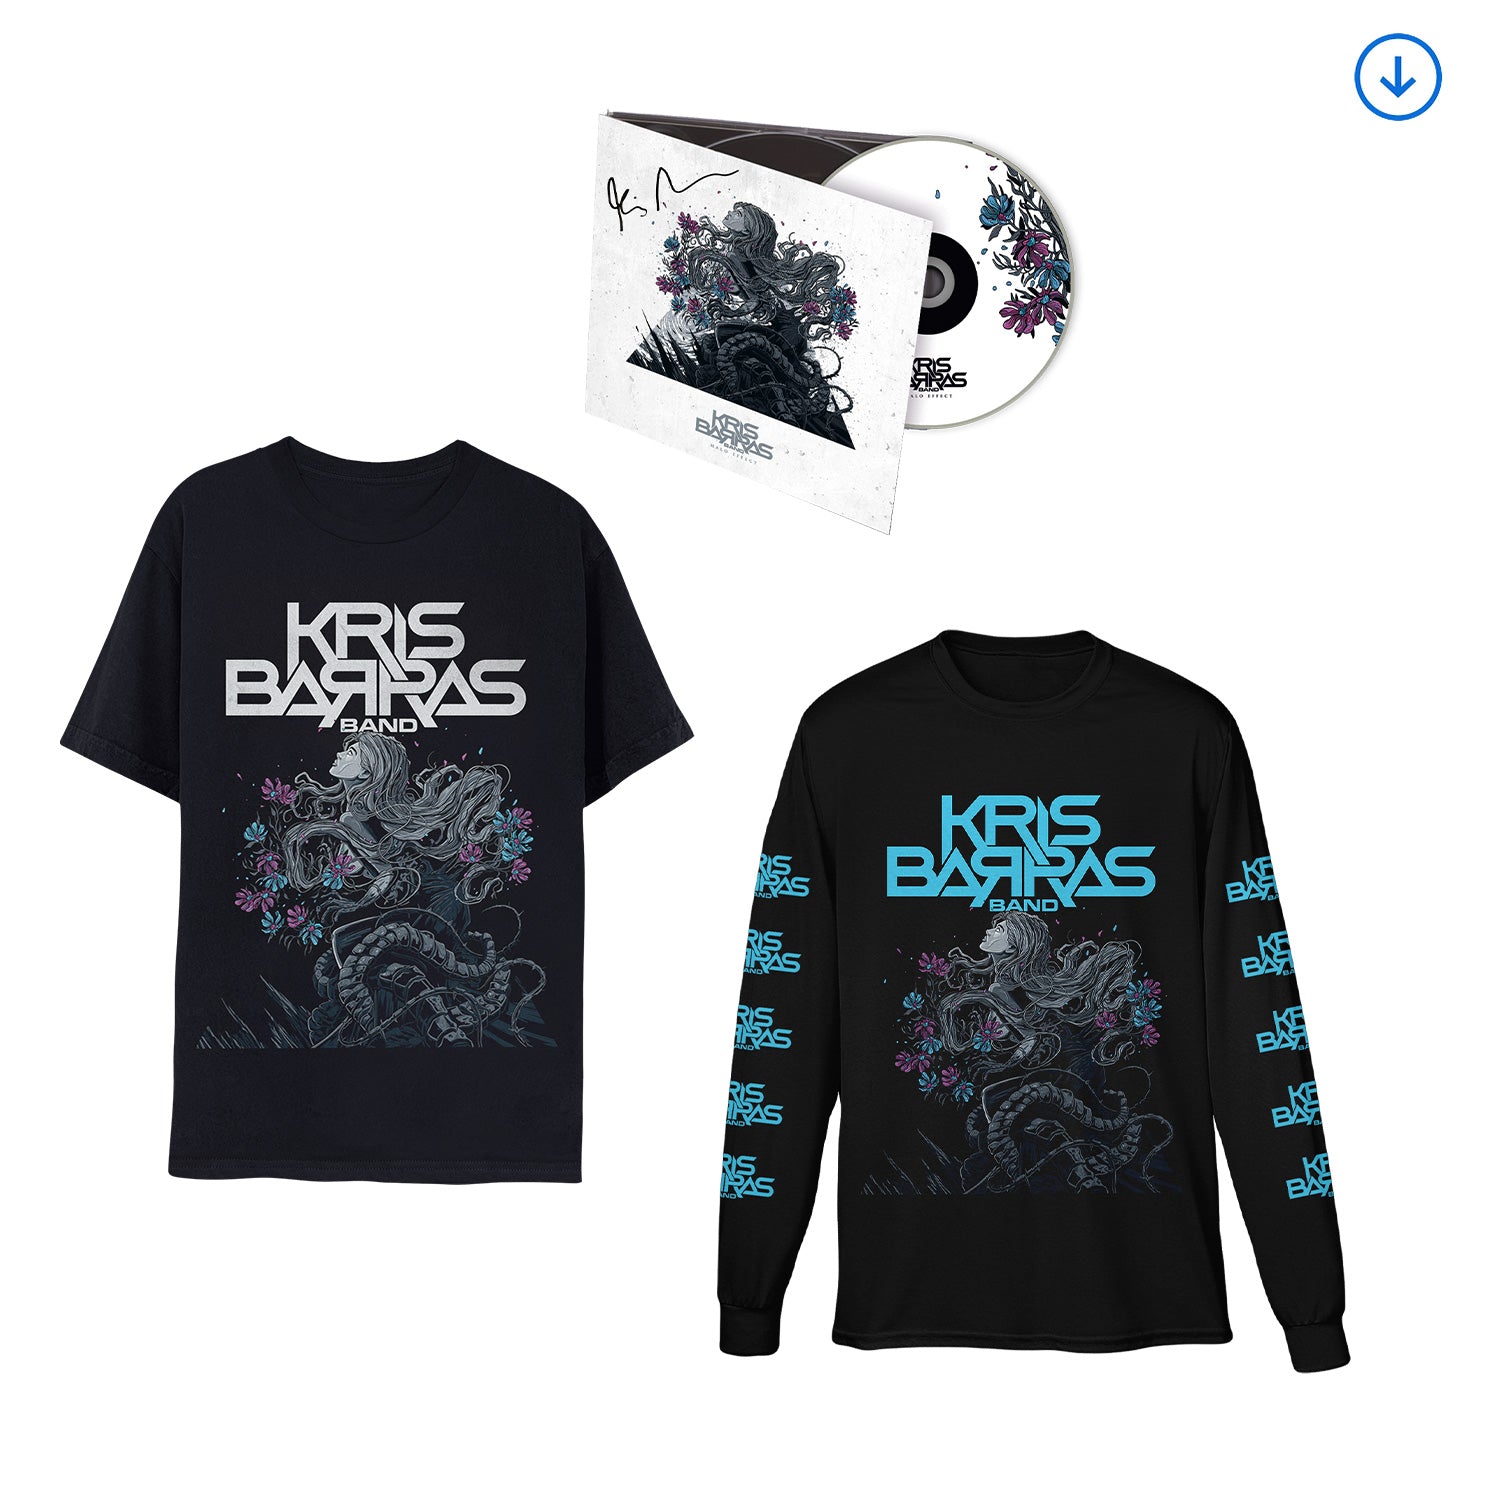 Kris Barras Band "Halo Effect" Signed CD, Download & Short or Long Sleeve T shirt - PRE-ORDER